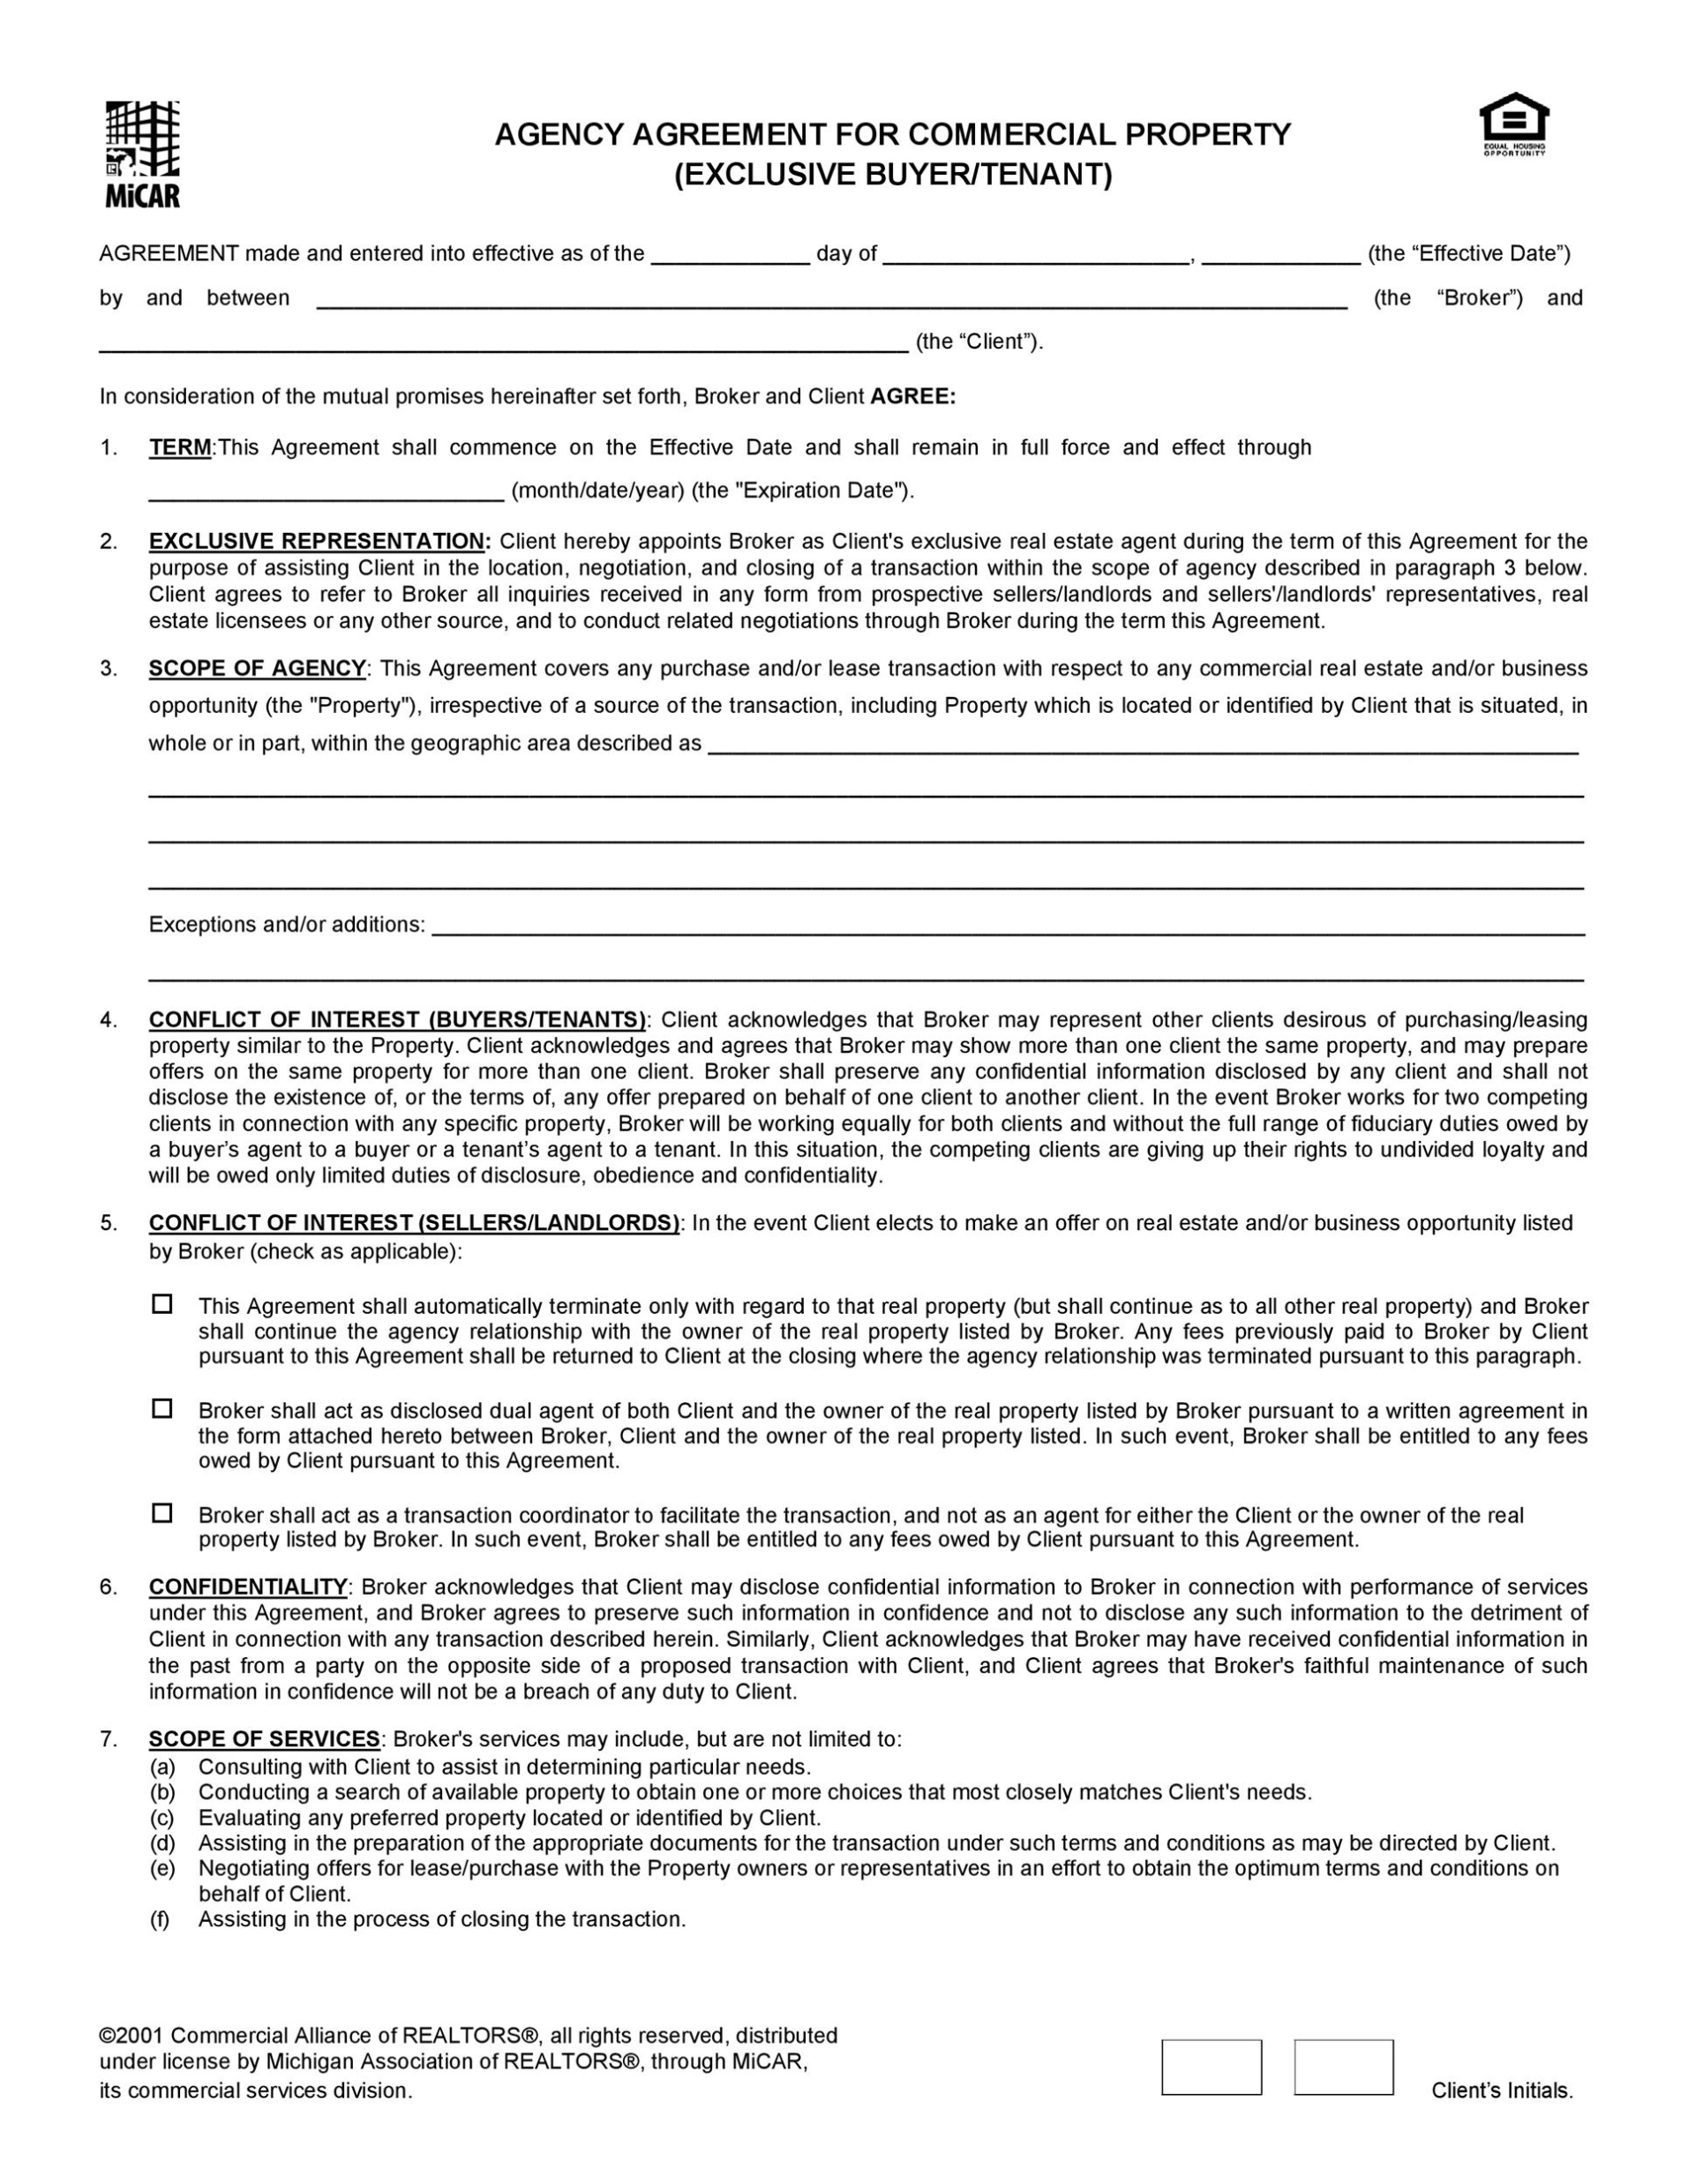 50 Free Agency Agreement Templates (Ms Word) ᐅ Templatelab Intended For Real Estate Broker Fee Agreement Template